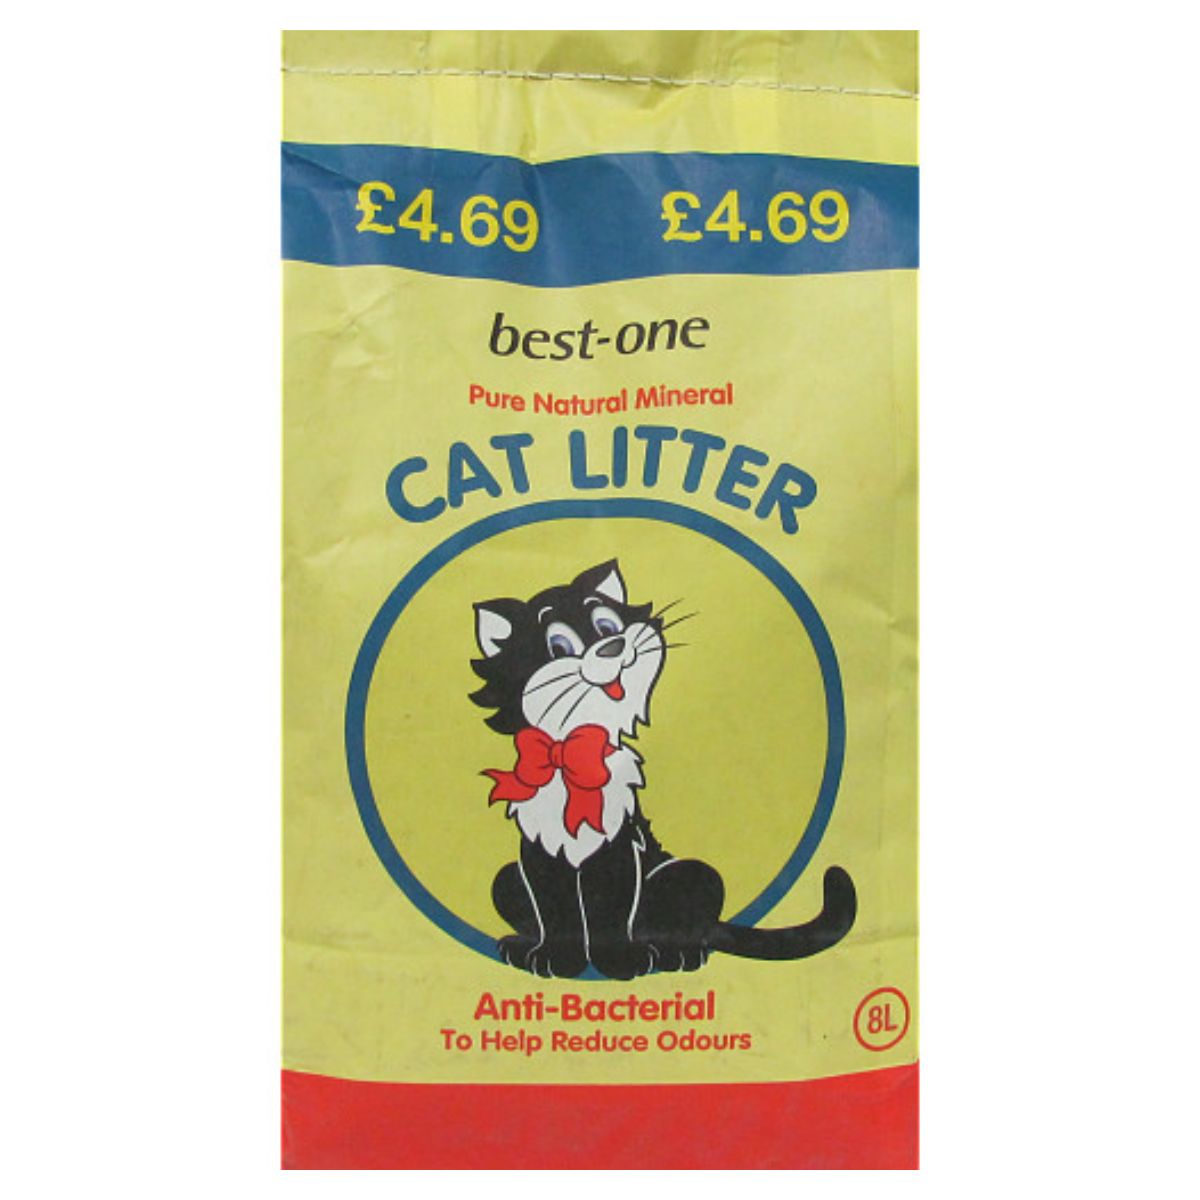 A Best One - Cat Litter - 8 Litres bag of cat litter with a cat on it.